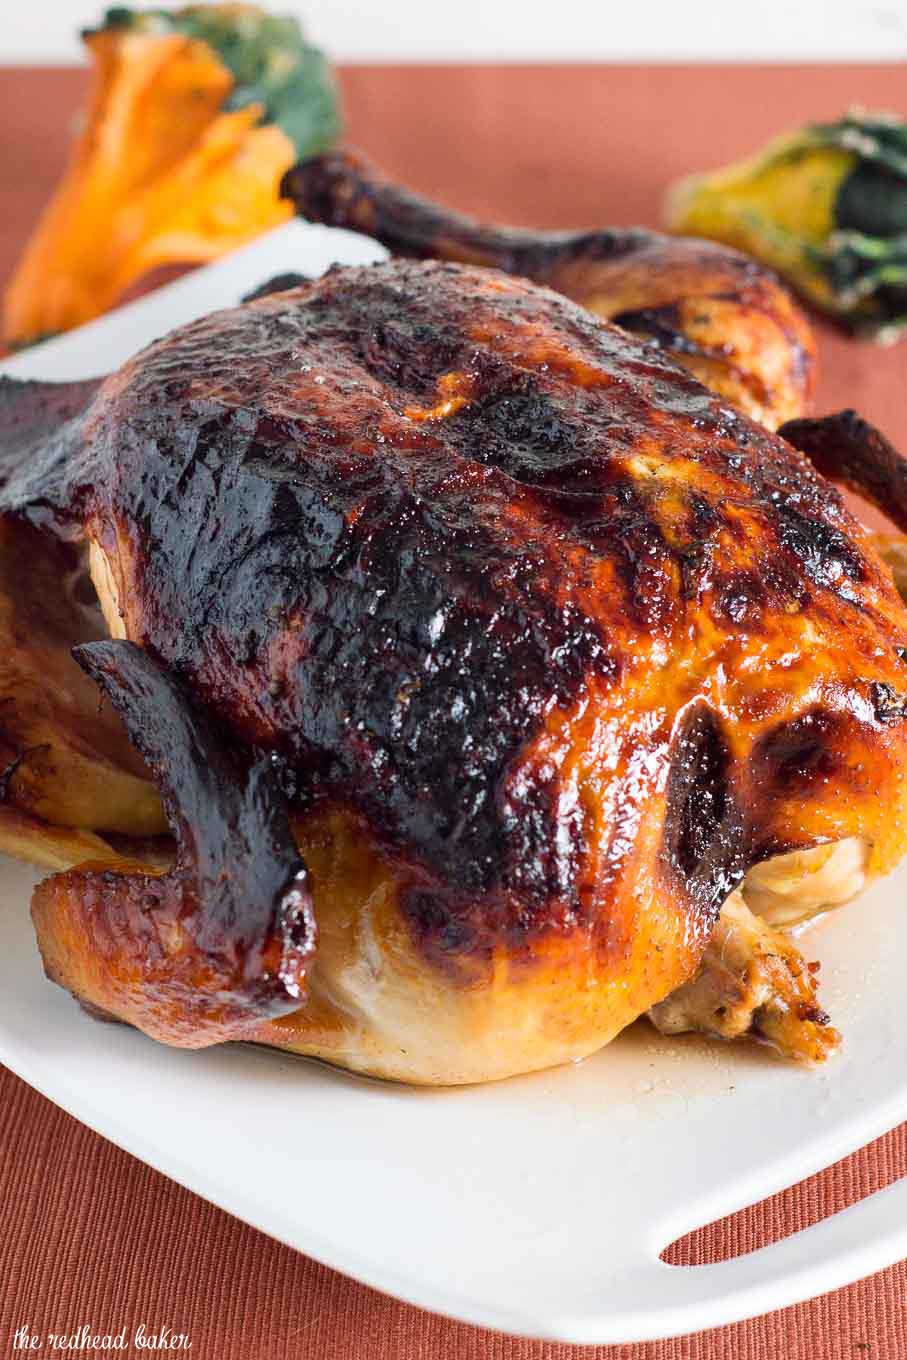 Cider-sage brined turkey has delicious fall flavor, making it the perfect Thanksgiving bird. The brine ensures the turkey stays moist, and sage compound butter crisps the skin. 